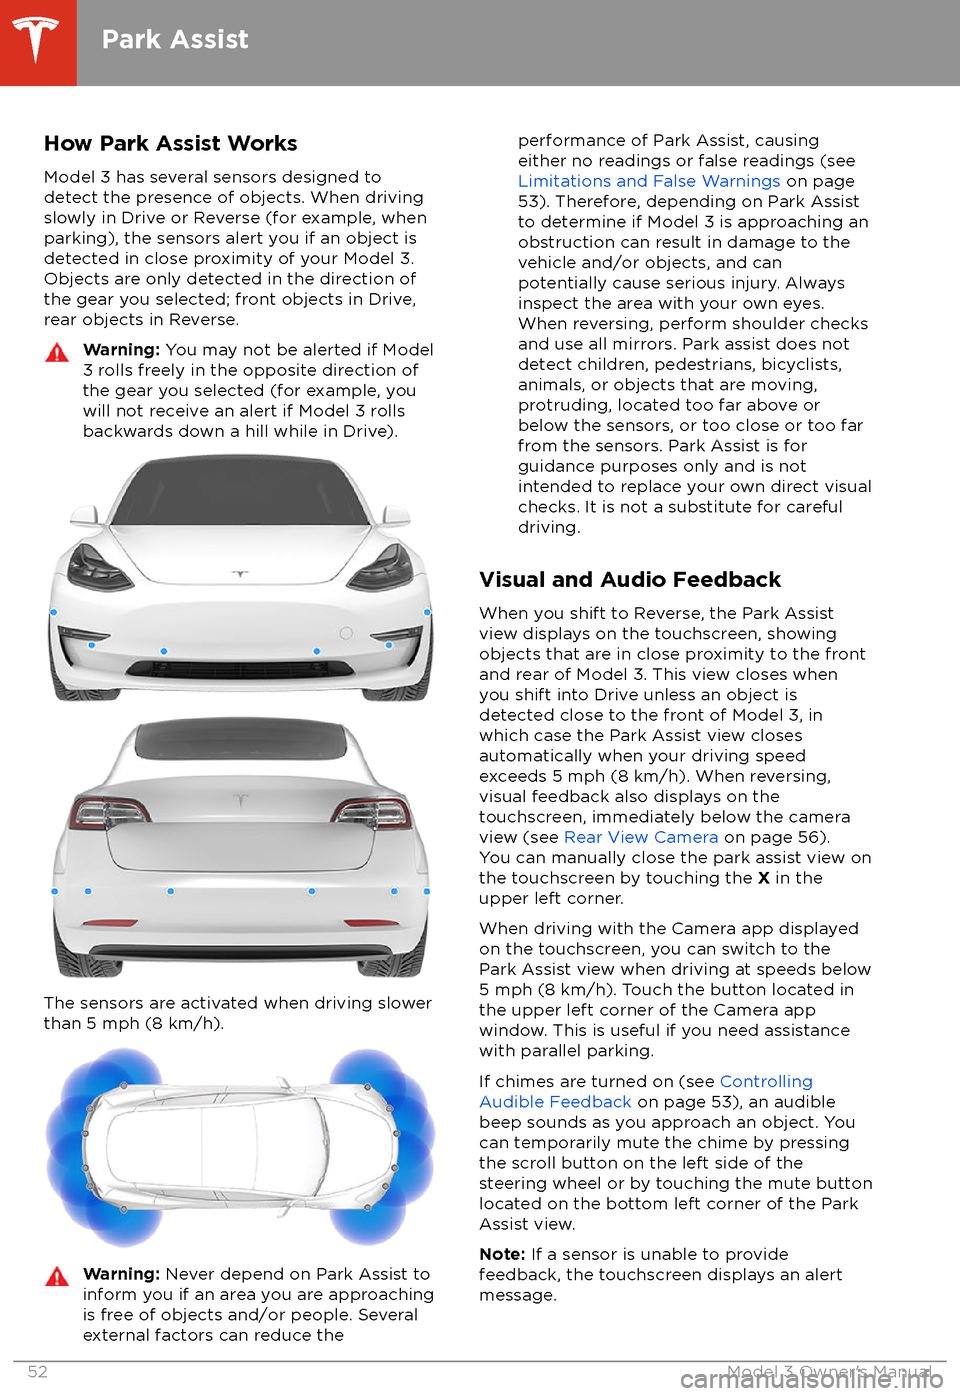 TESLA MODEL 3 2018 User Guide How Park Assist WorksModel 3 has several sensors designed to
detect the presence of objects. When driving slowly in Drive or Reverse (for example, when
parking), the sensors alert you if an object is
